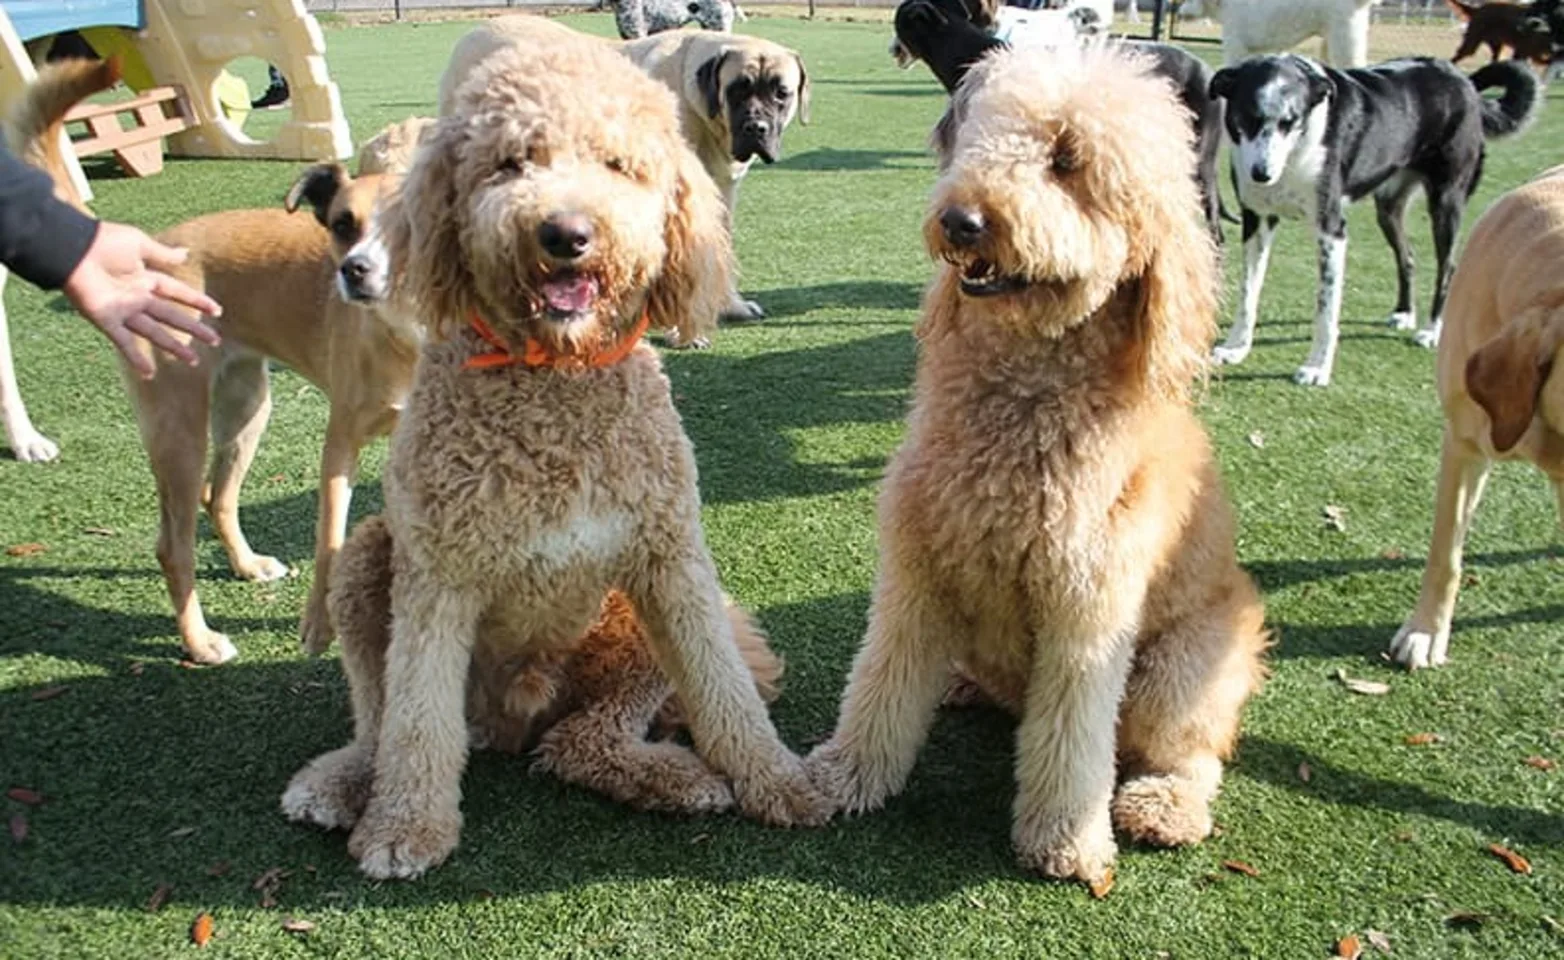 Grassy playyard full of dogs and the two dogs in the center of the image are touching paws